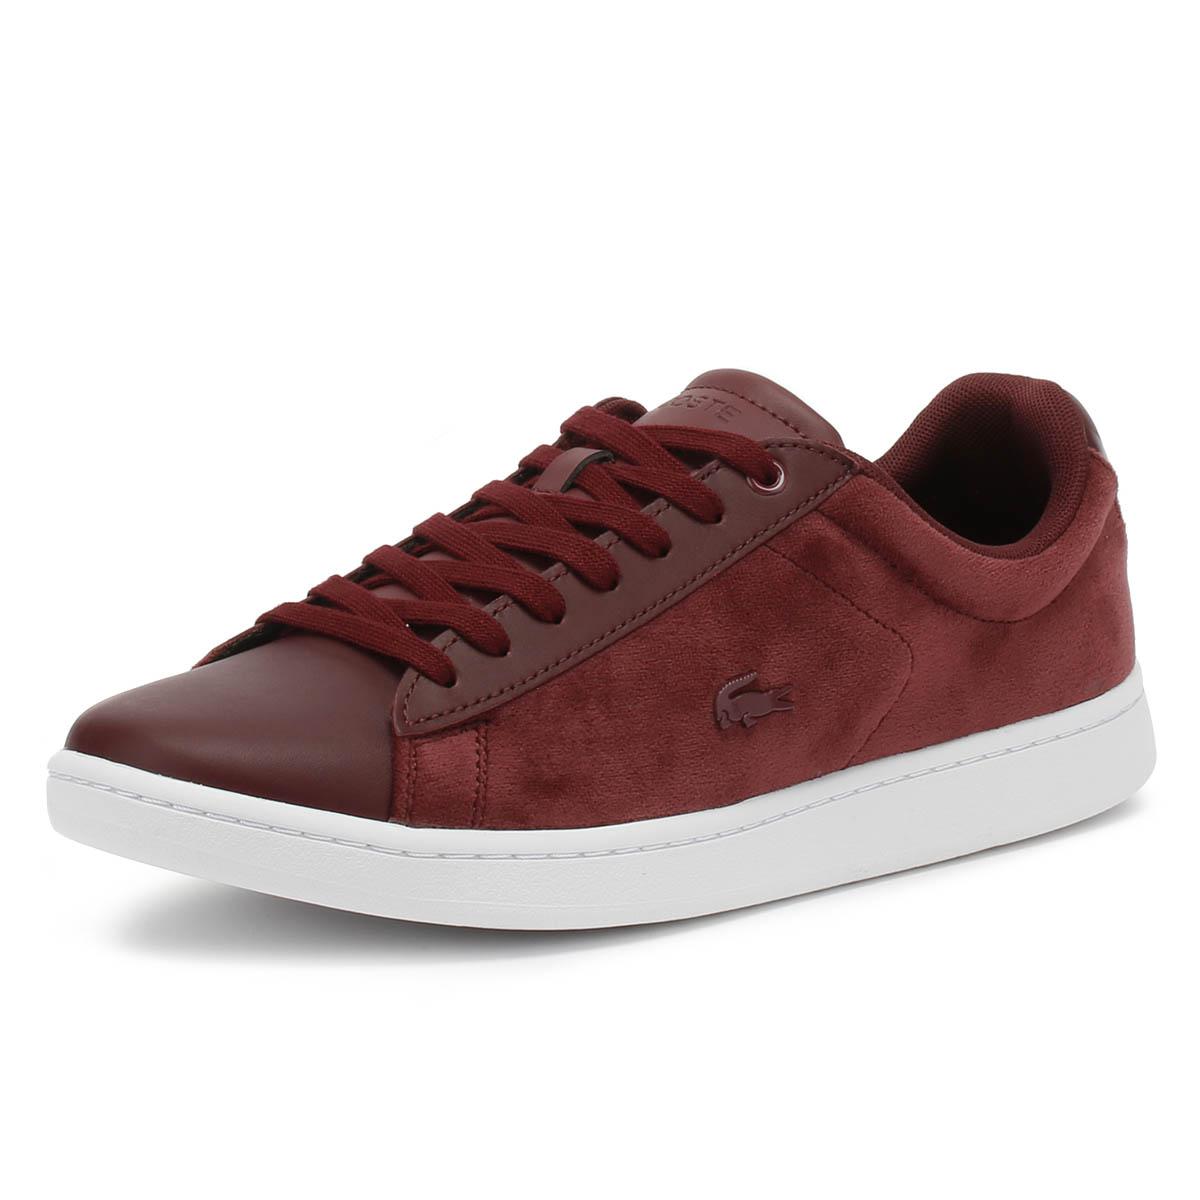 Lacoste Carnaby Evo Burgundy Store, SAVE 60%.